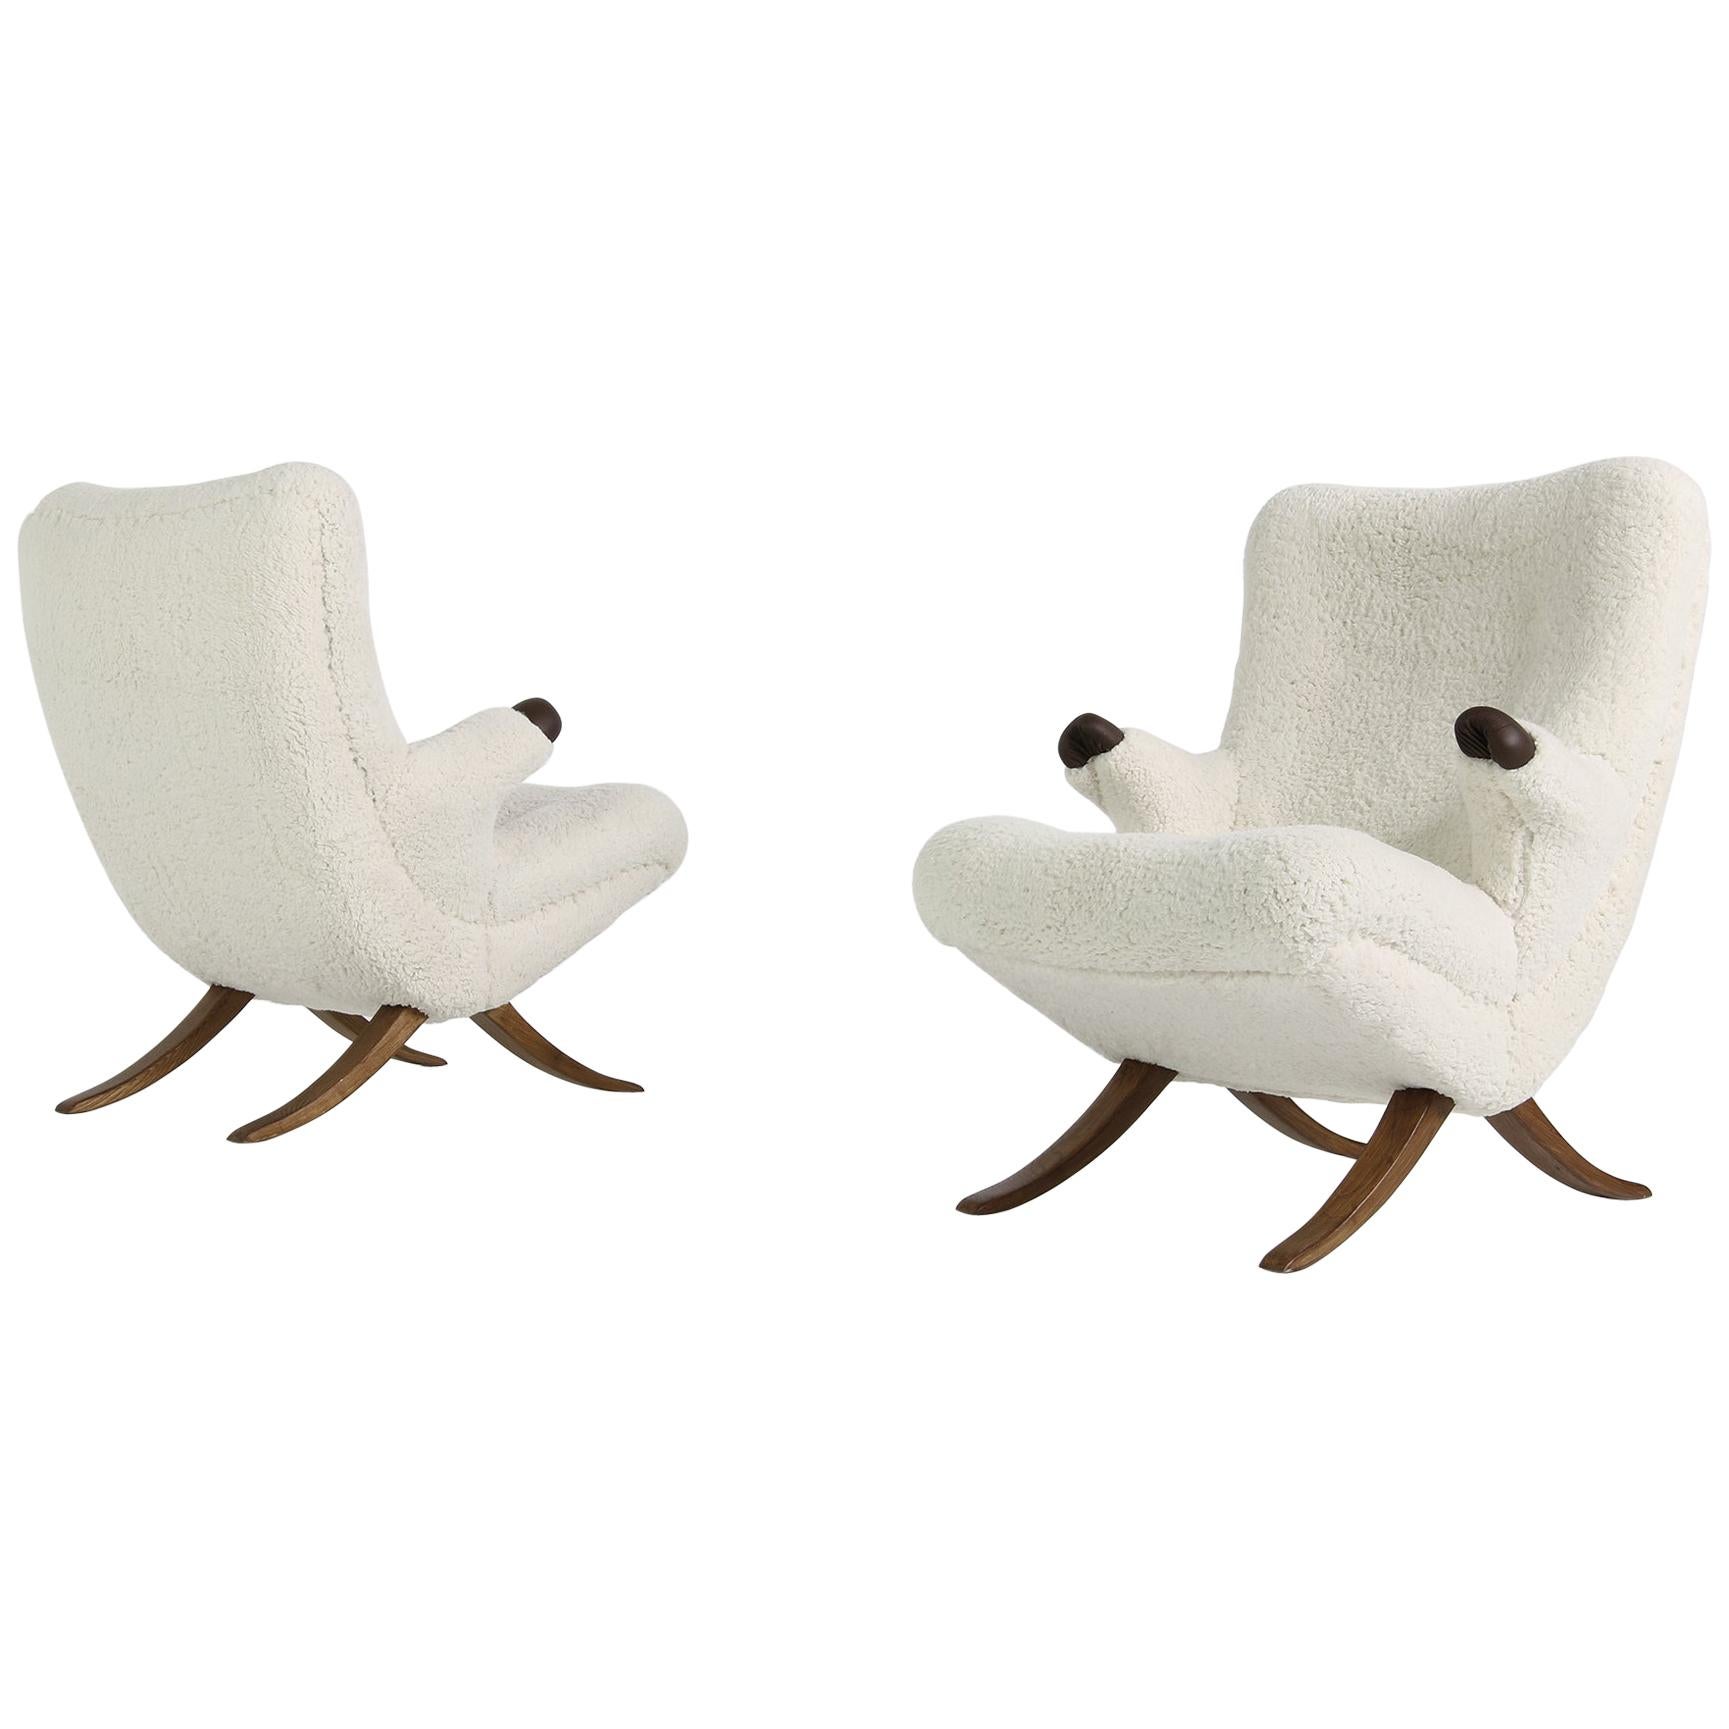 Pair of Unique 1950s Organic Lounge Chairs Teddy Fur & Leather Midcentury Modern